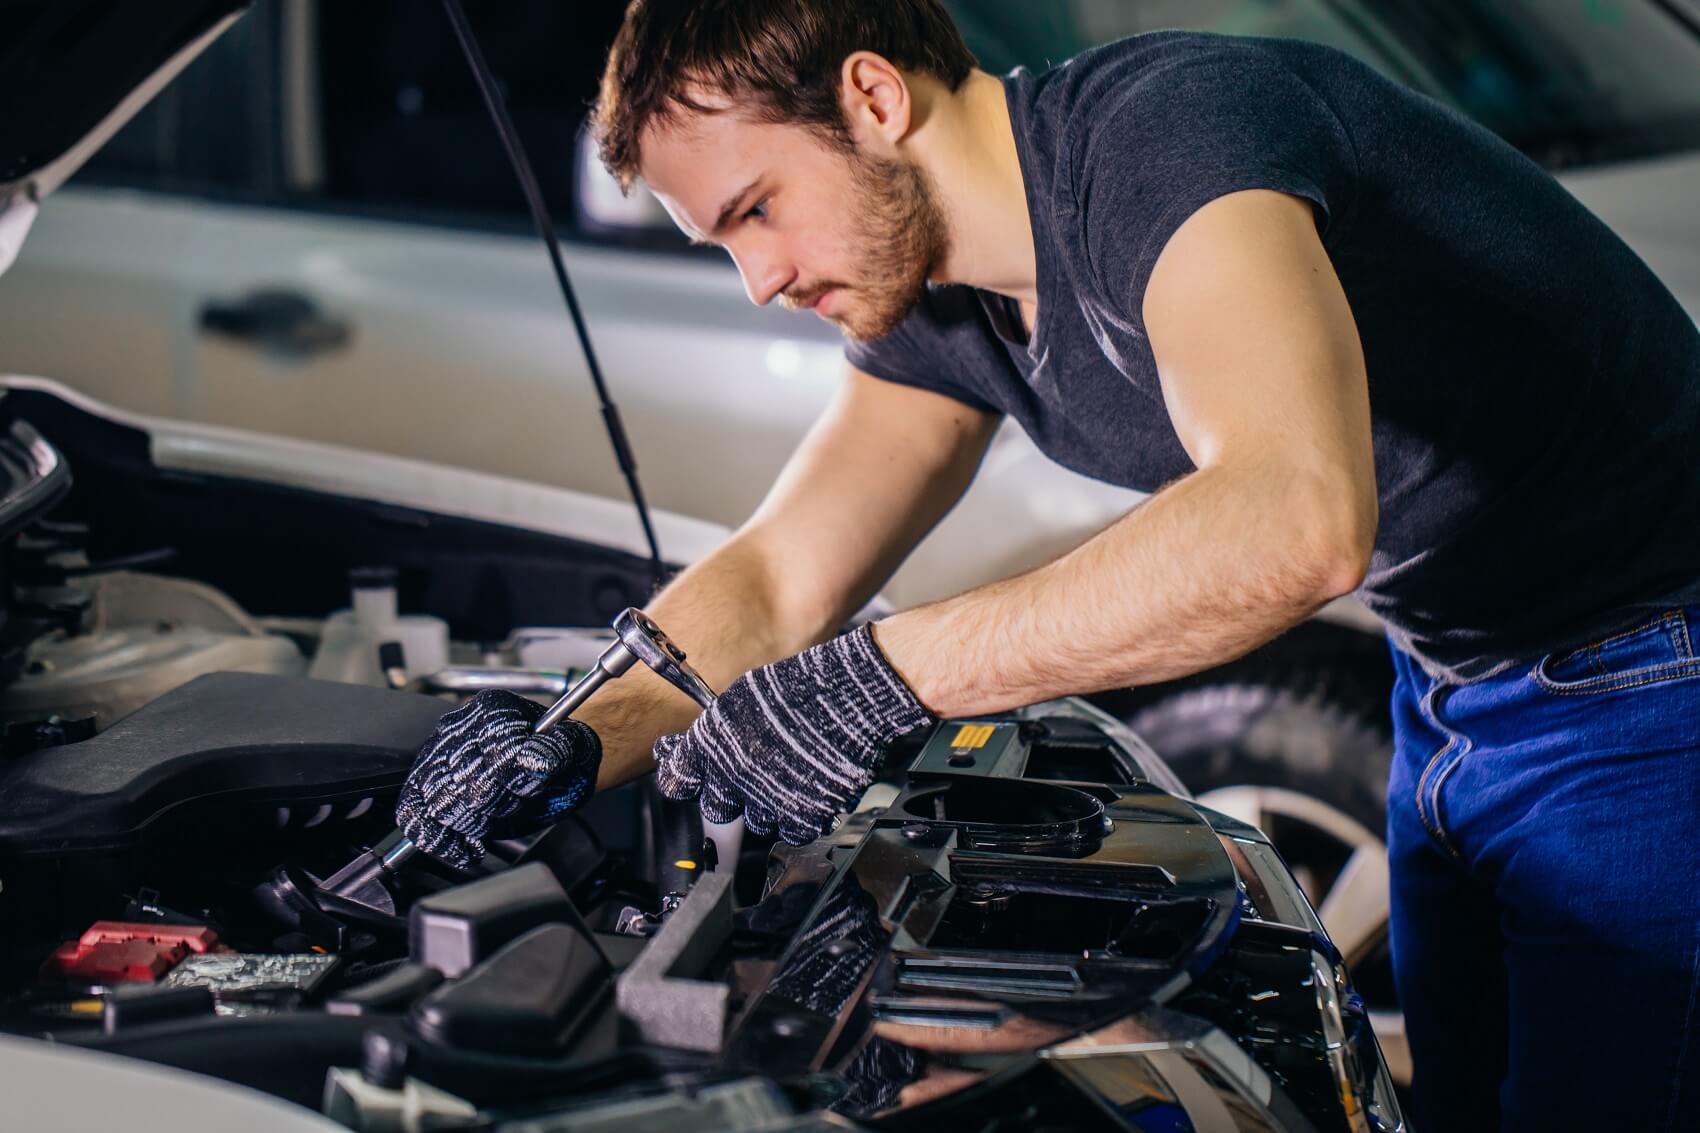 Our Service Center Mechanics Are Skilled and Experienced